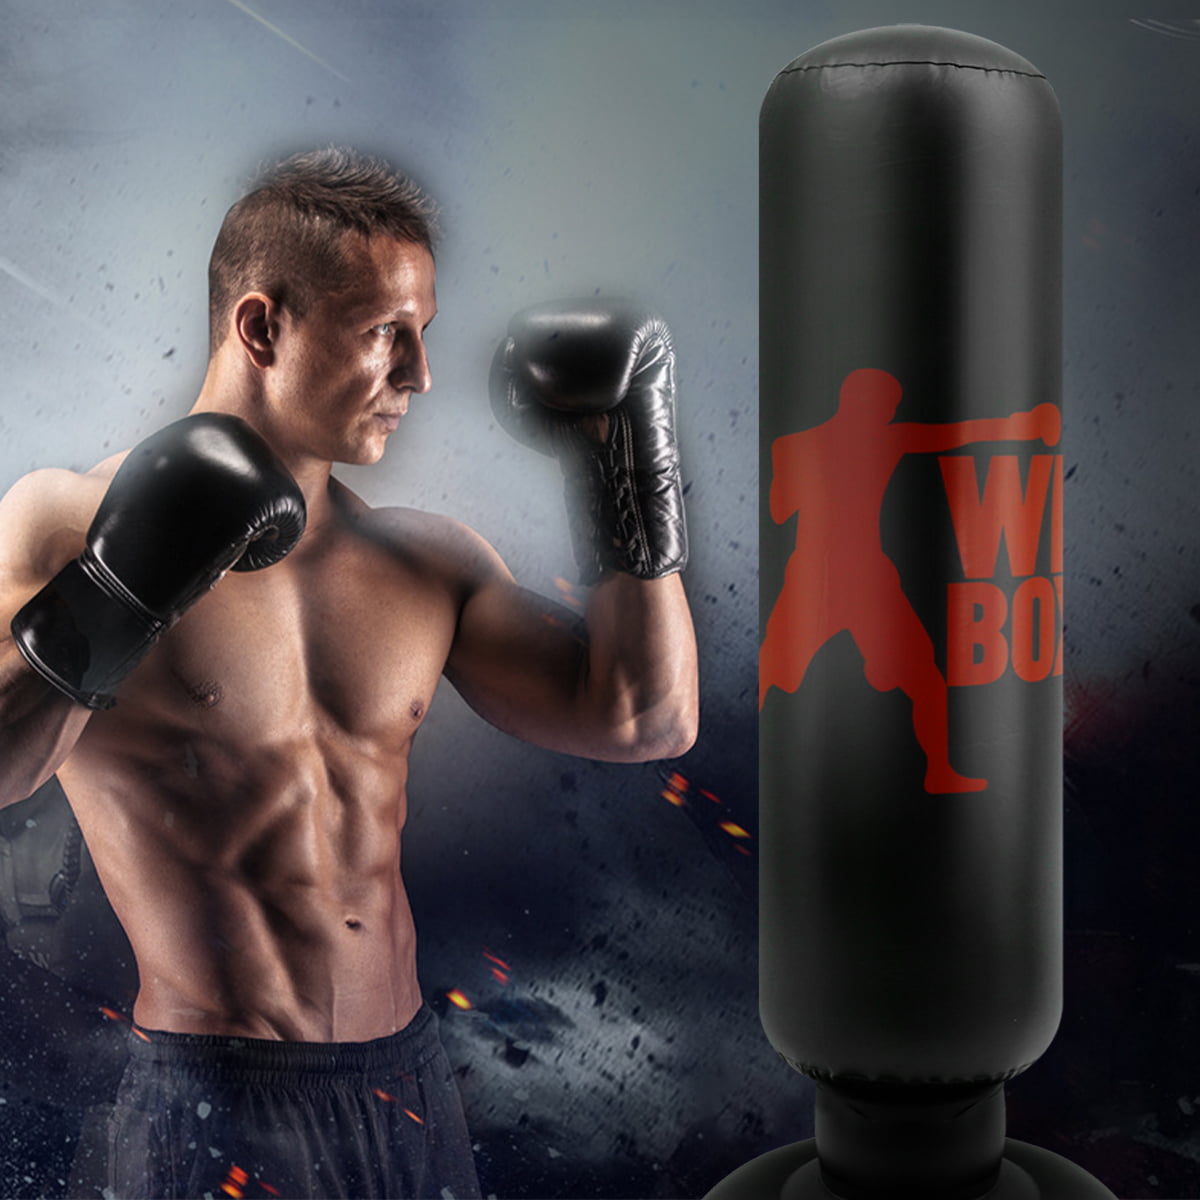 63inch Inflatable Punching Bag Kids Adults Freestanding Boxing Bag Heavy Fitness Punching Bag for Children Bounce-Back Action Practicing Karate Boxing Kickboxing Muay Thai 